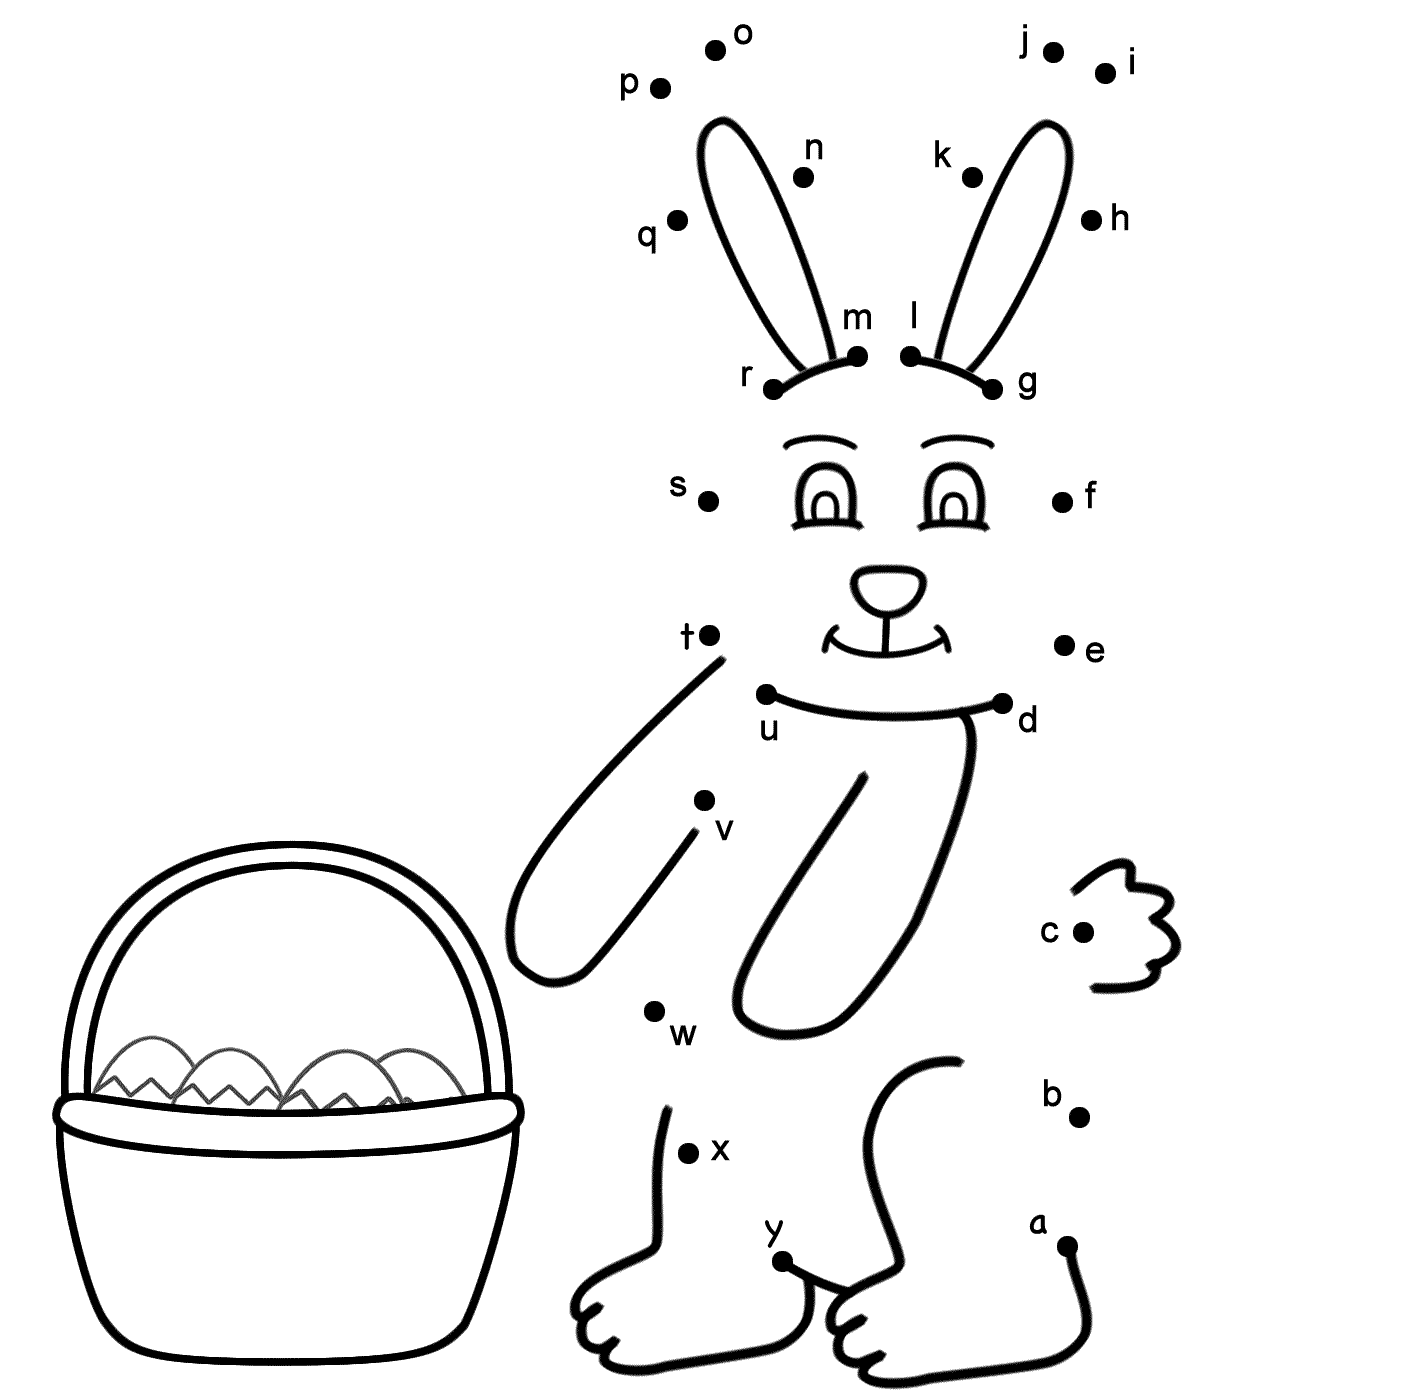 Easter Bunny - Connect the Dots by Lowercase Letters (Easter)